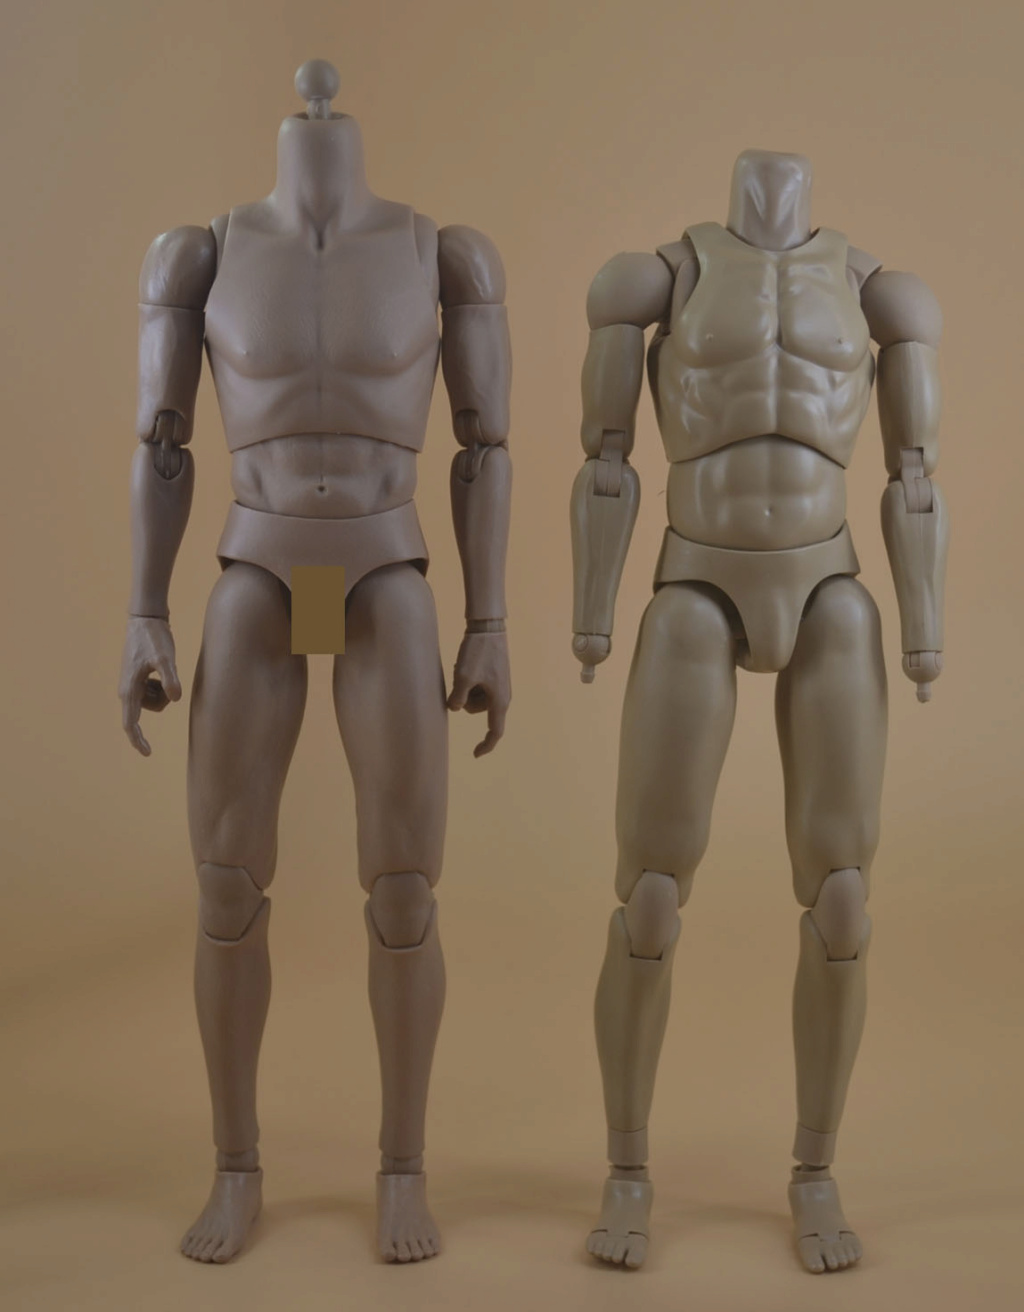 Coomodel - NEW PRODUCT: COOMODEL: 1/6 MB001 standard male body, MB002 tall male body, MB003 muscle male body, MB004 tall muscle body _dsc3738